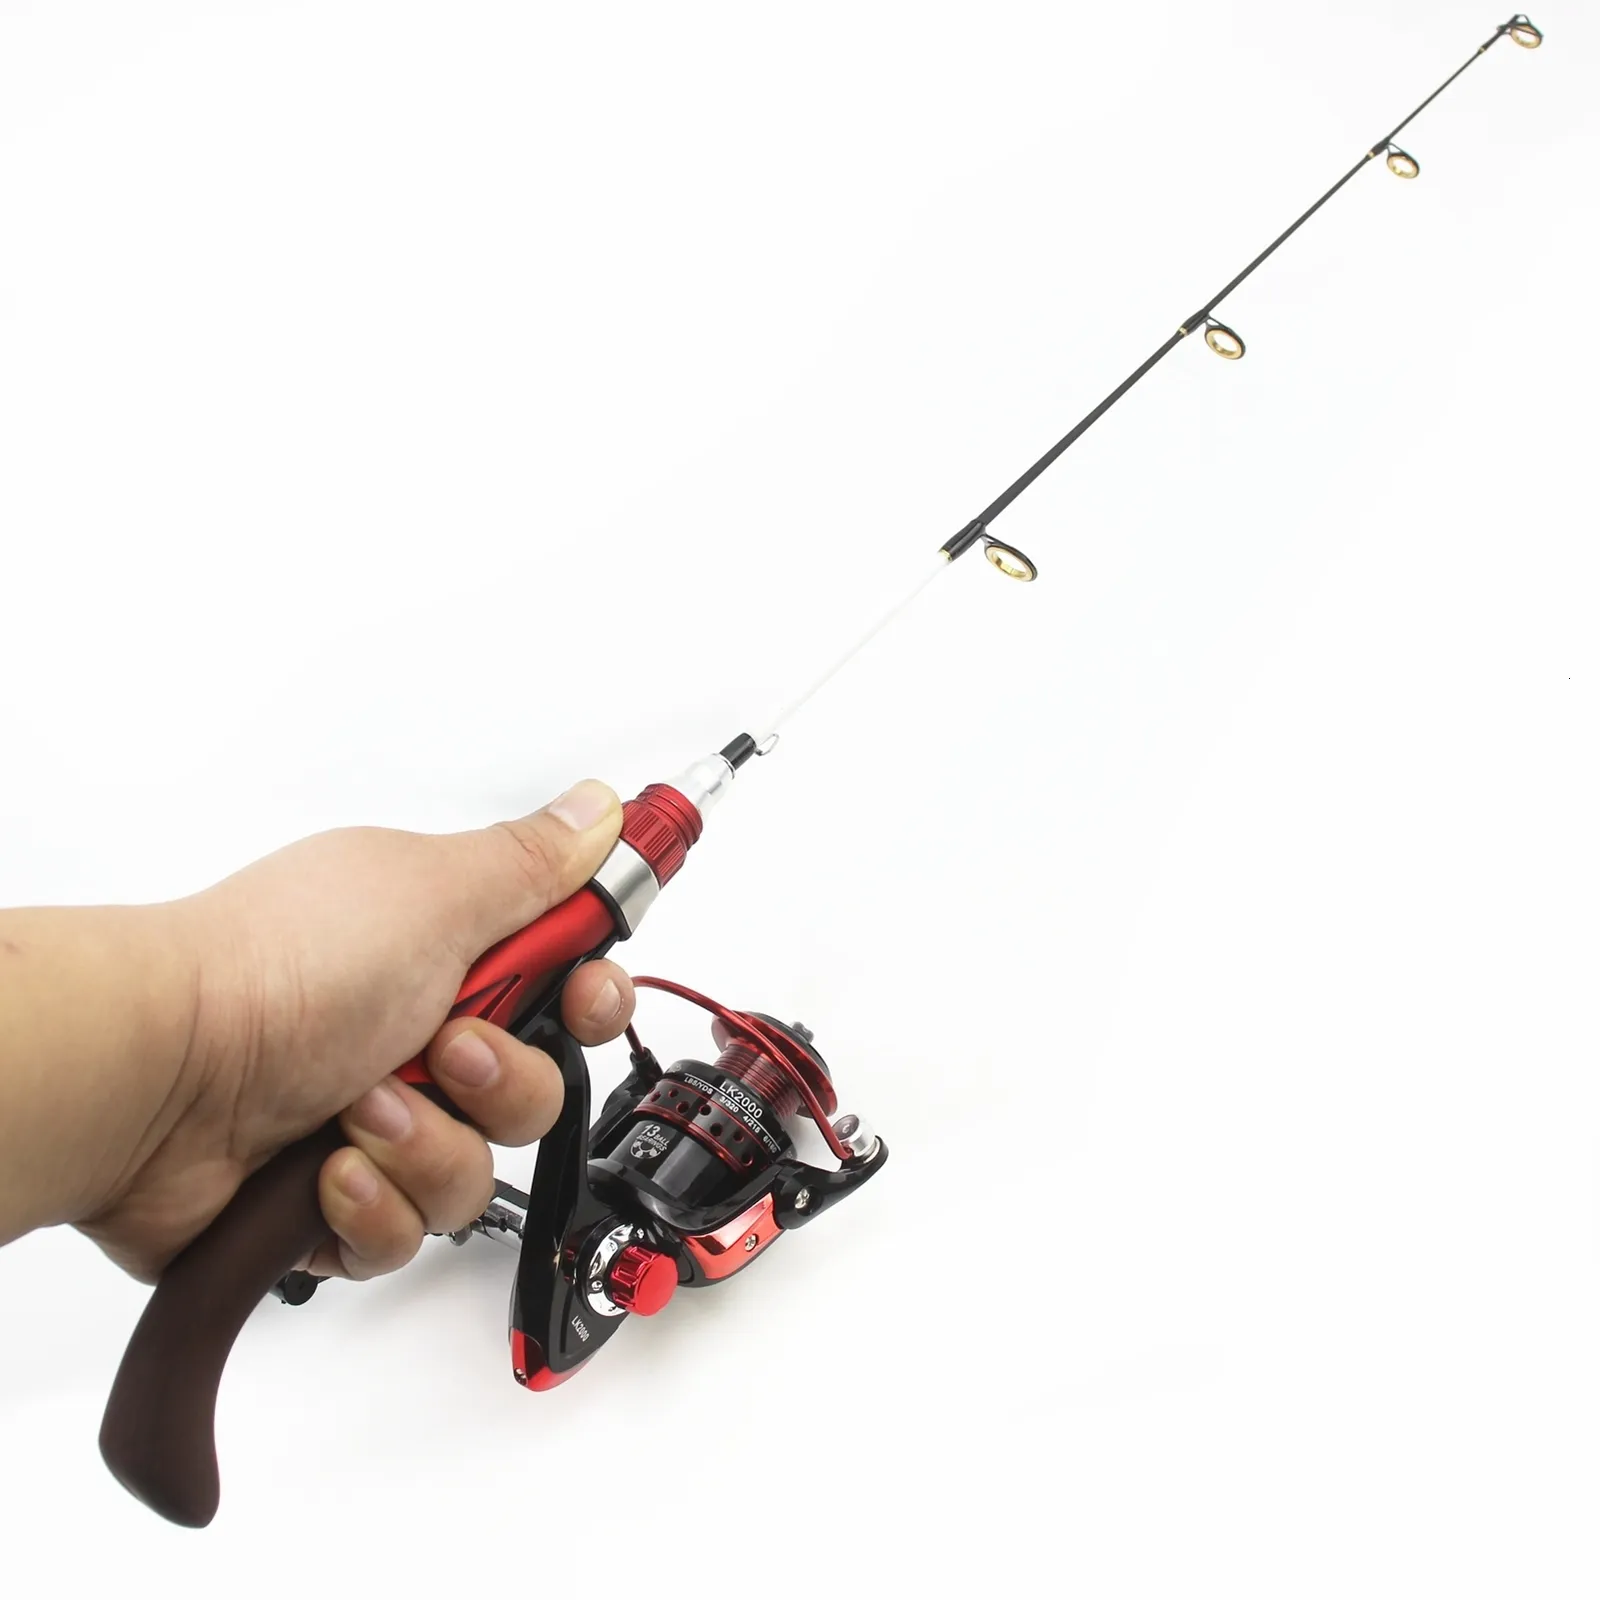 Winter Best Boat Spinning Rod Set 65cm Ice Fishing Reel Combos